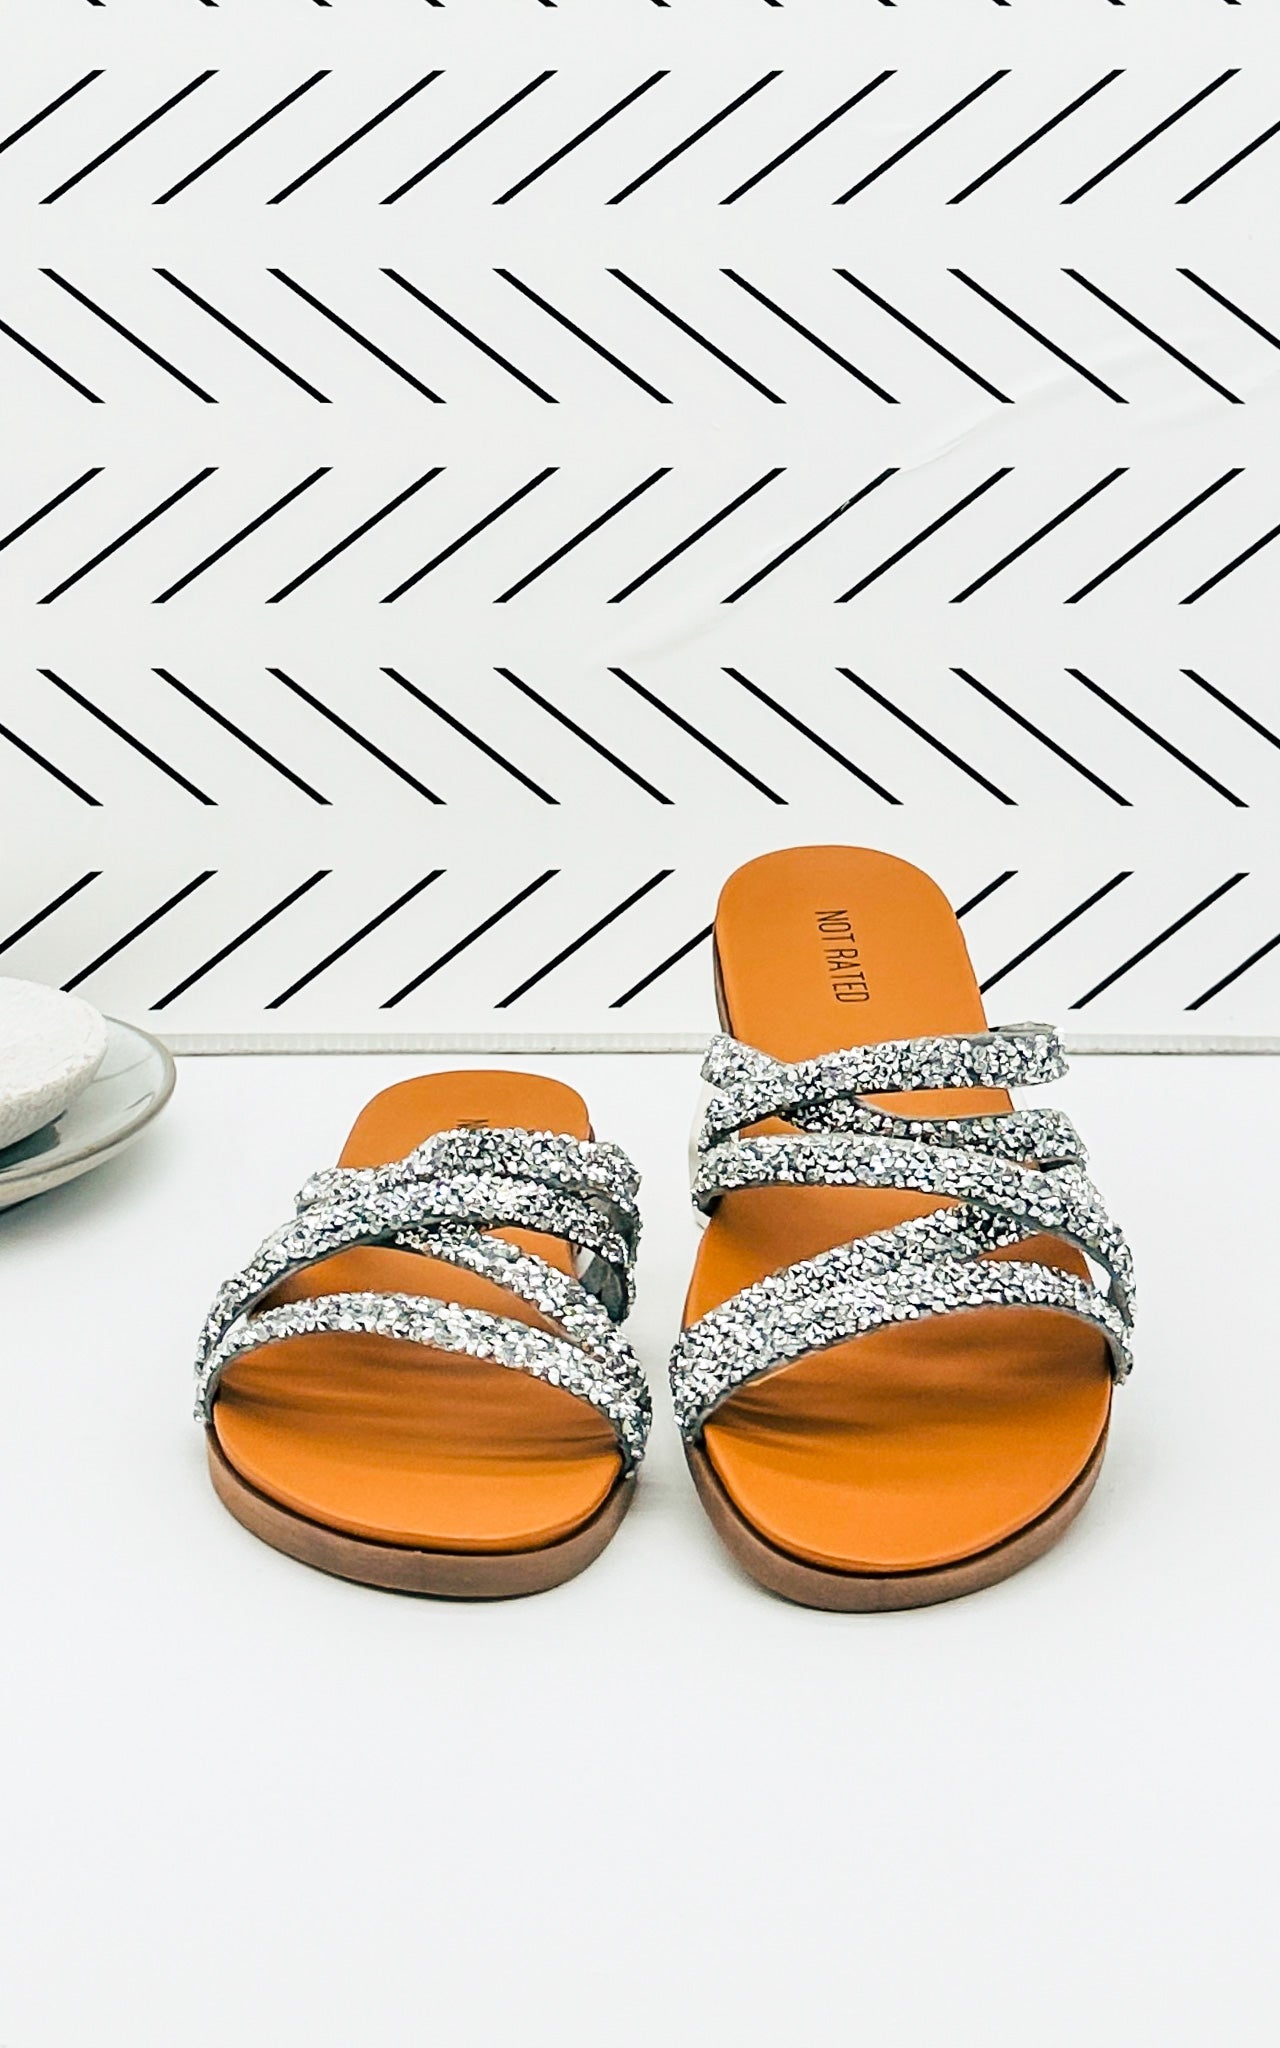 Not Rated Eliana Sandals in Silver - cantonclothingcompany